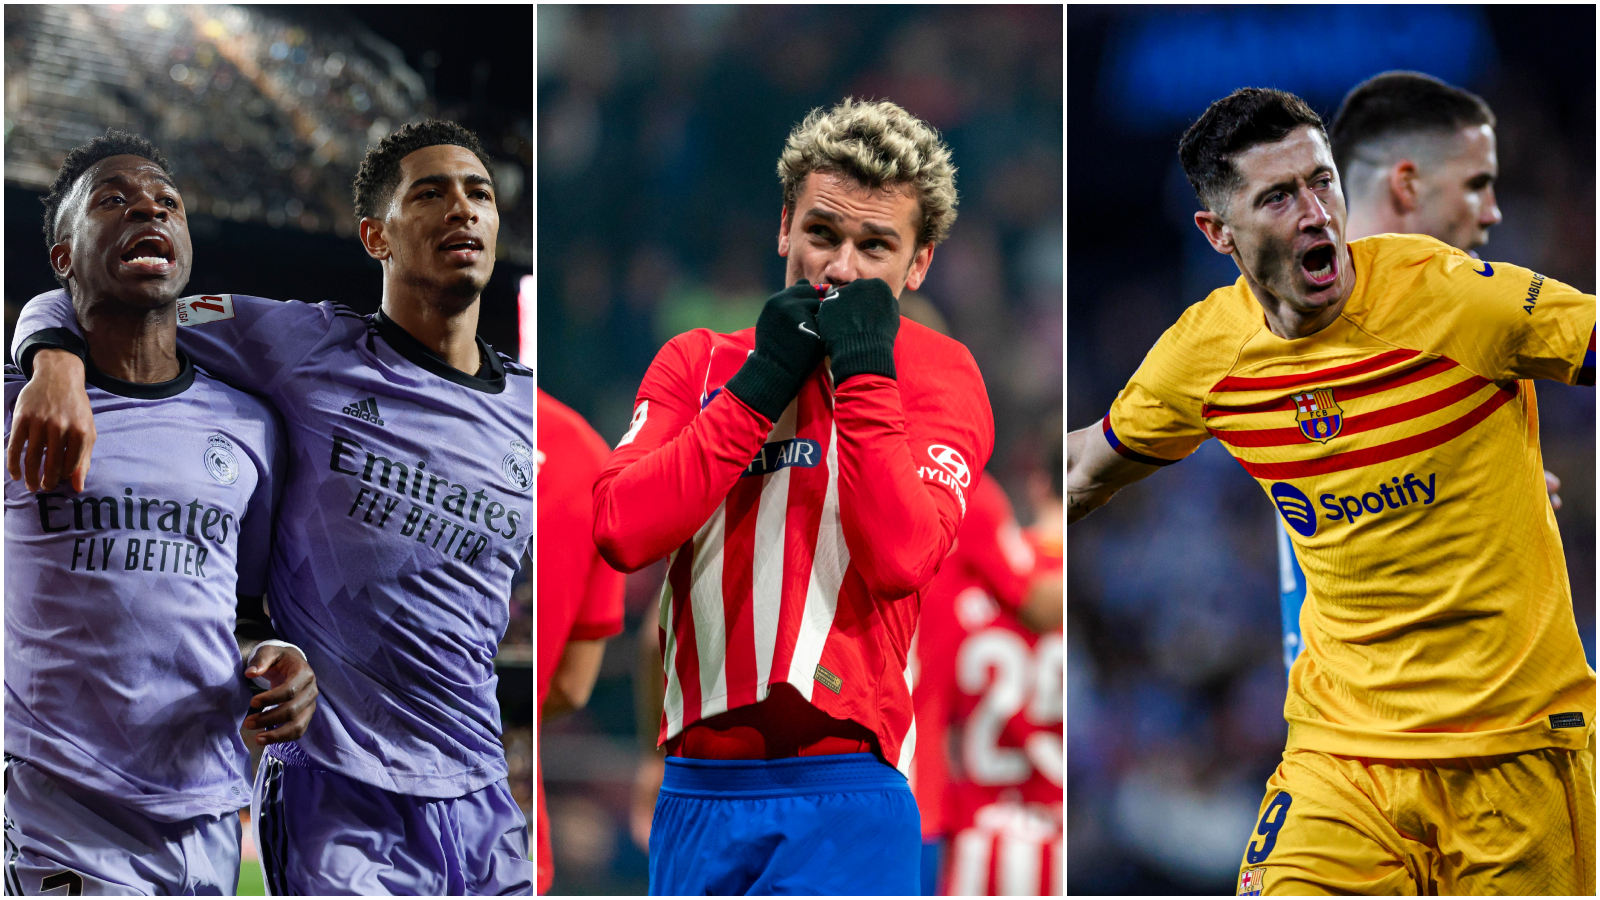 The Champions League quarter-finals are here: What to expect from the three La Liga sides?